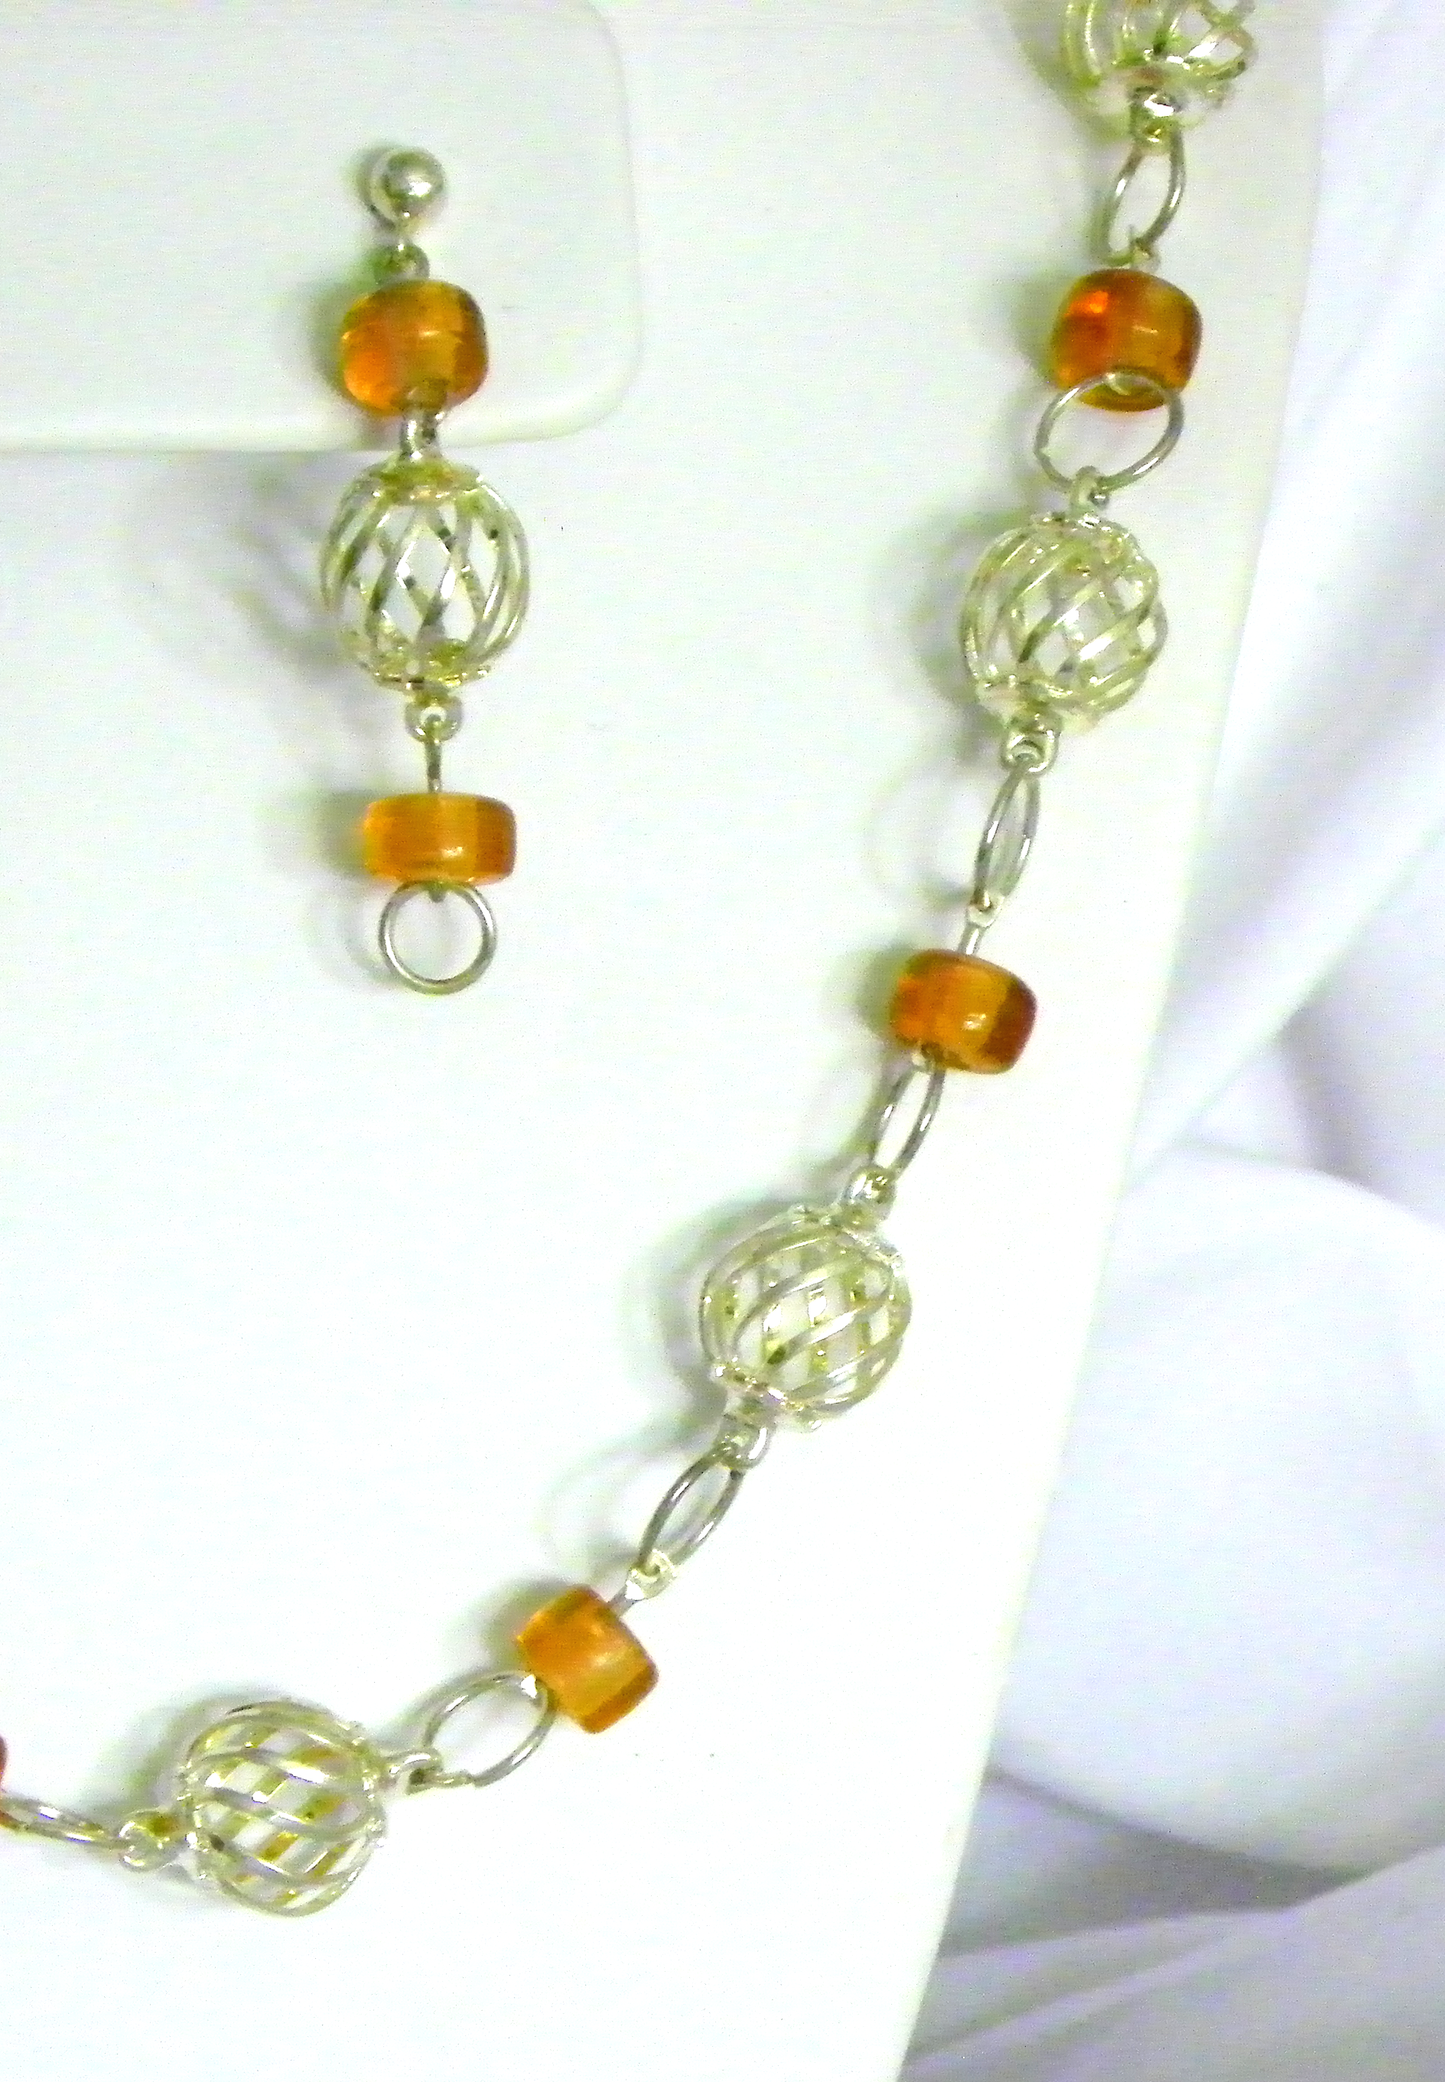 Silver Plated Spiral Wire Ball and Amber Beads Necklace and Earring Set